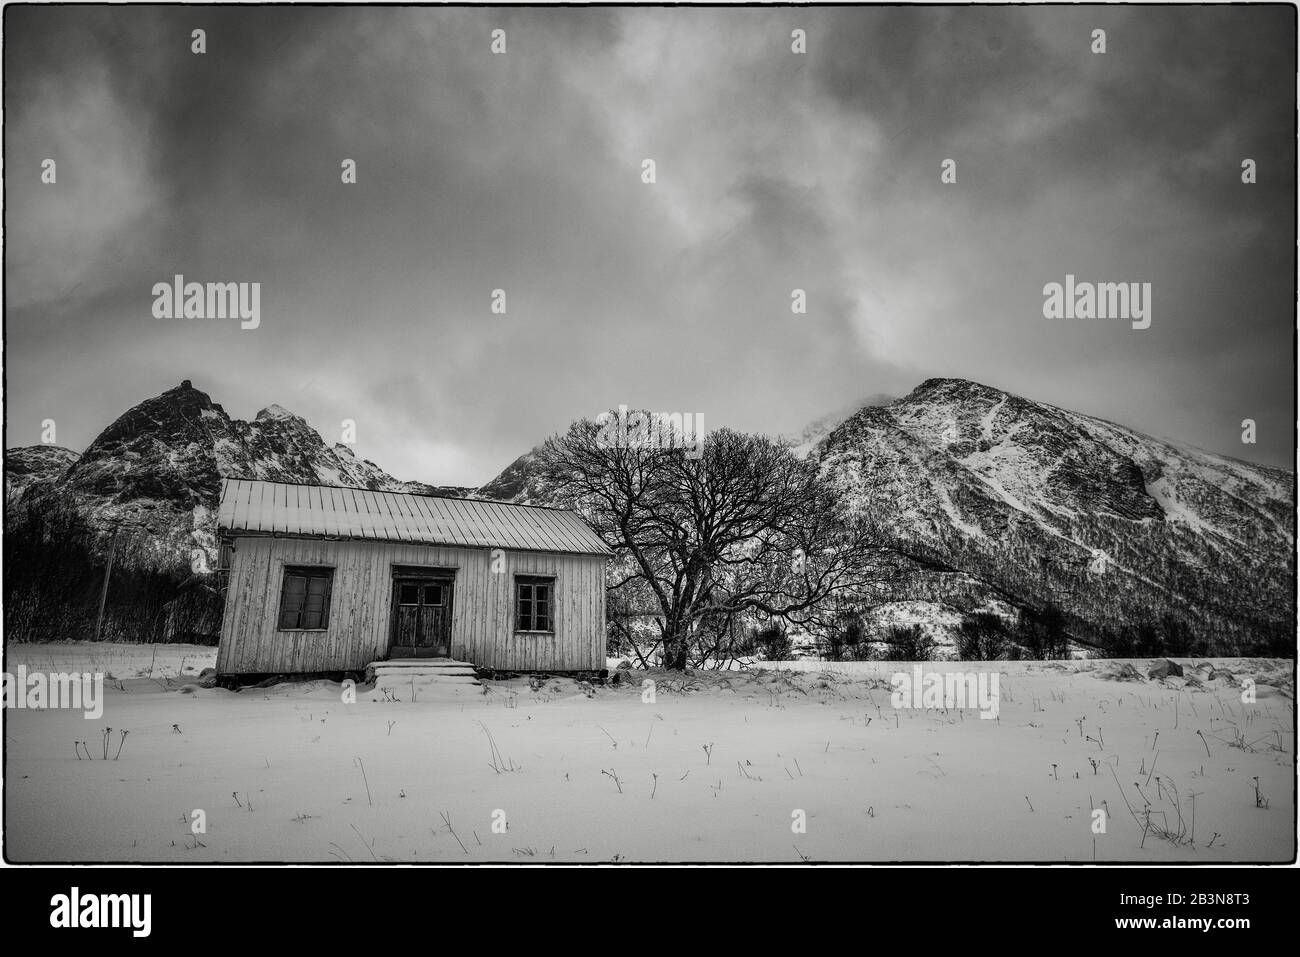 Black and white photo of a house (door and 2 windows), tree and mountains in Norway reminding of a child's drawing Stock Photo